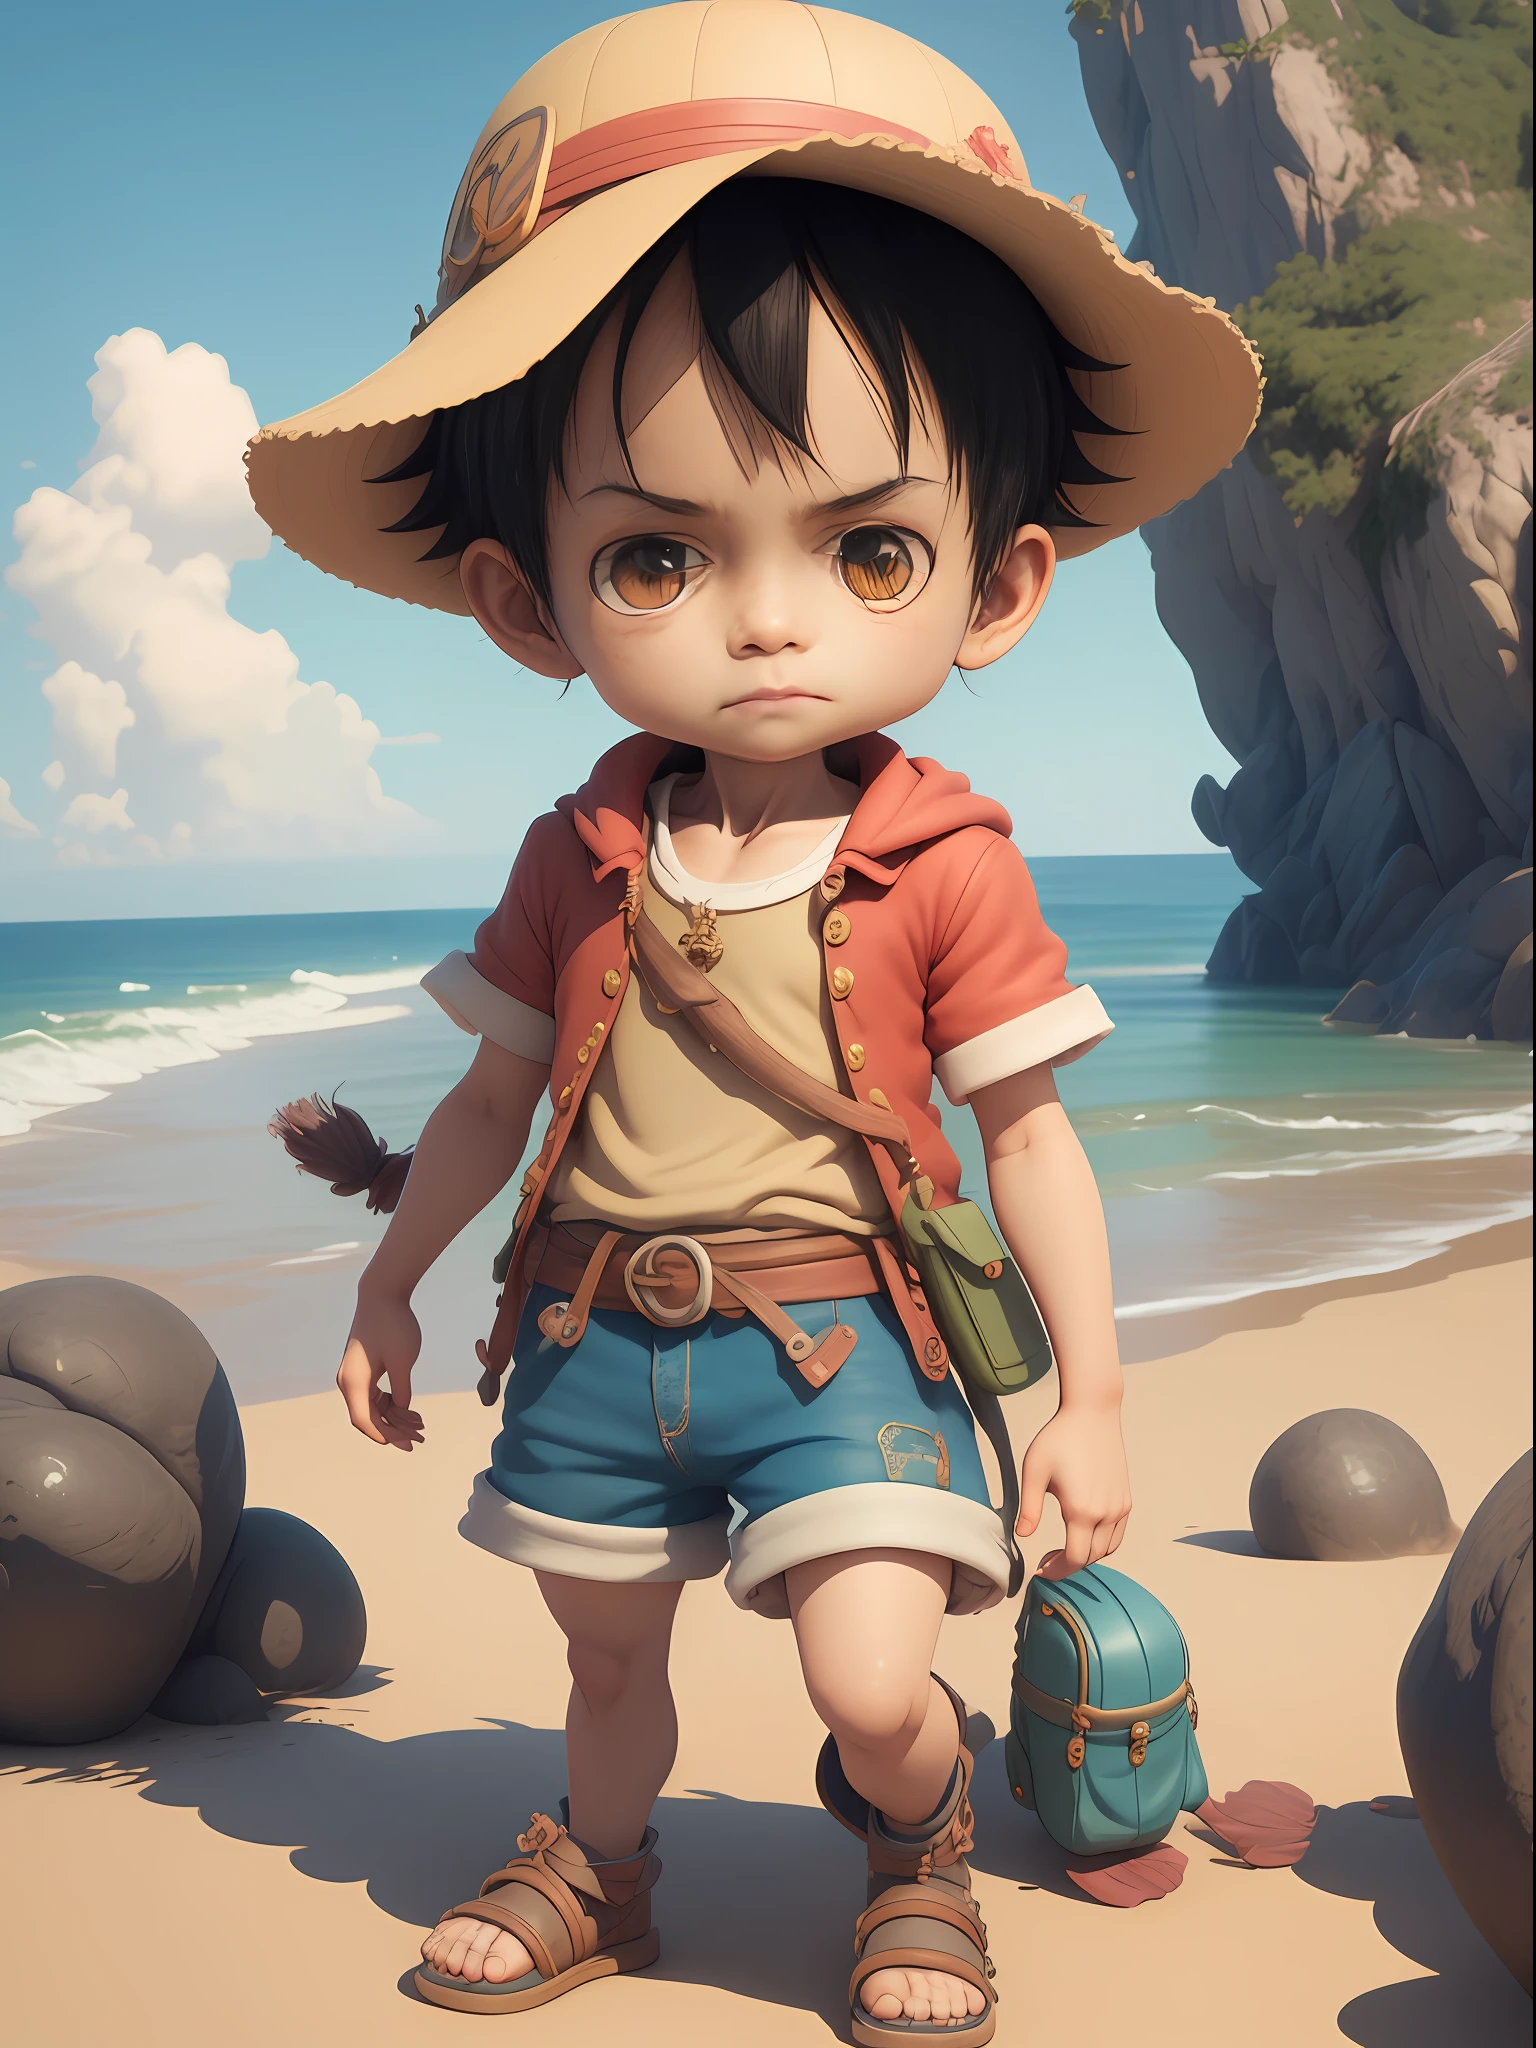 1boy, solo, cute 3d render, cute detailed digital art, male explorer mini cute boy, cute digital painting, stylized 3d render, cute digital art, cute render 3d anime boy, luffy the little pirate looks up, cute! c4d, portrait anime sea pirate boy, he is wearing an open long-sleeved red cardigan with four buttons, with a yellow sash tied around his waist, blue shorts with cuffs, sandals, set on the beach, there is a house, and a fishing boat